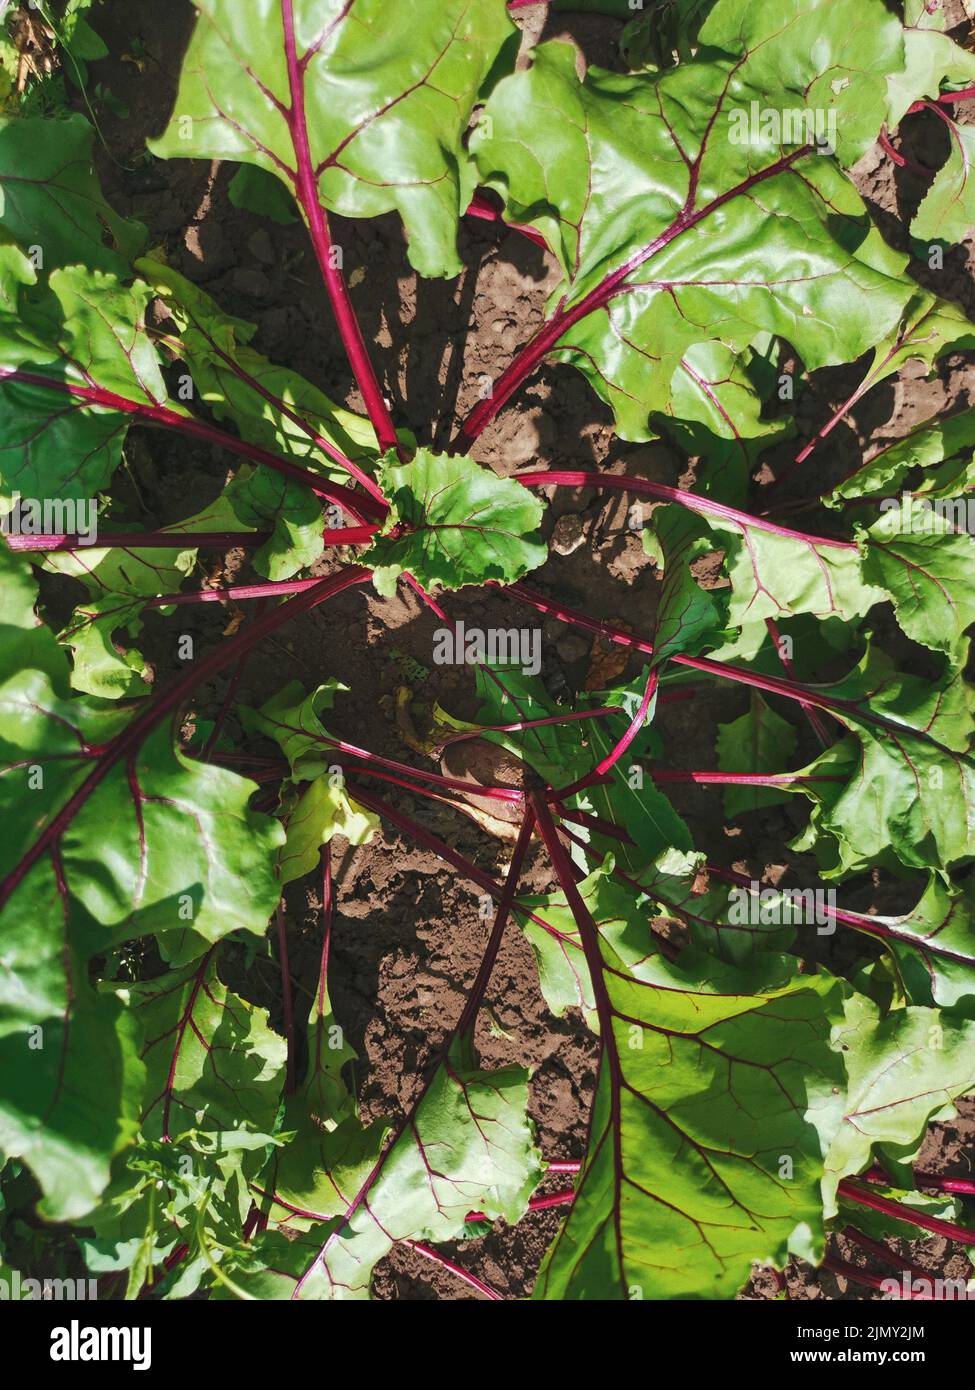 Garden beet green leaves top view close up. Beetroot growing from the ground. Homegrown beet on garden bed Stock Photo